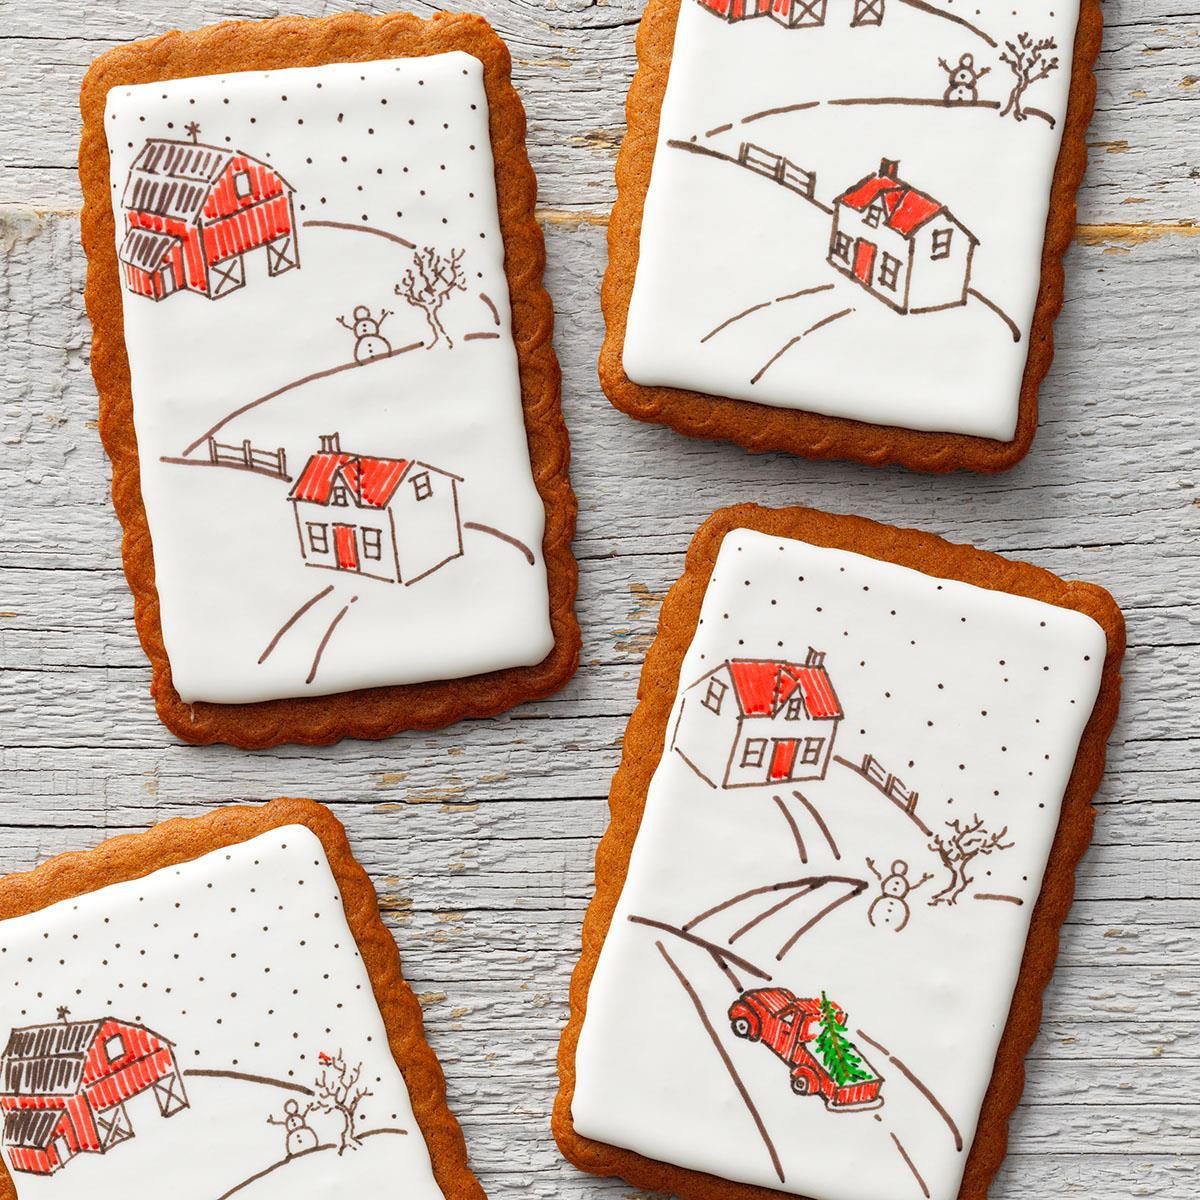 Inspired by Pictionary: Gingerbread Cards